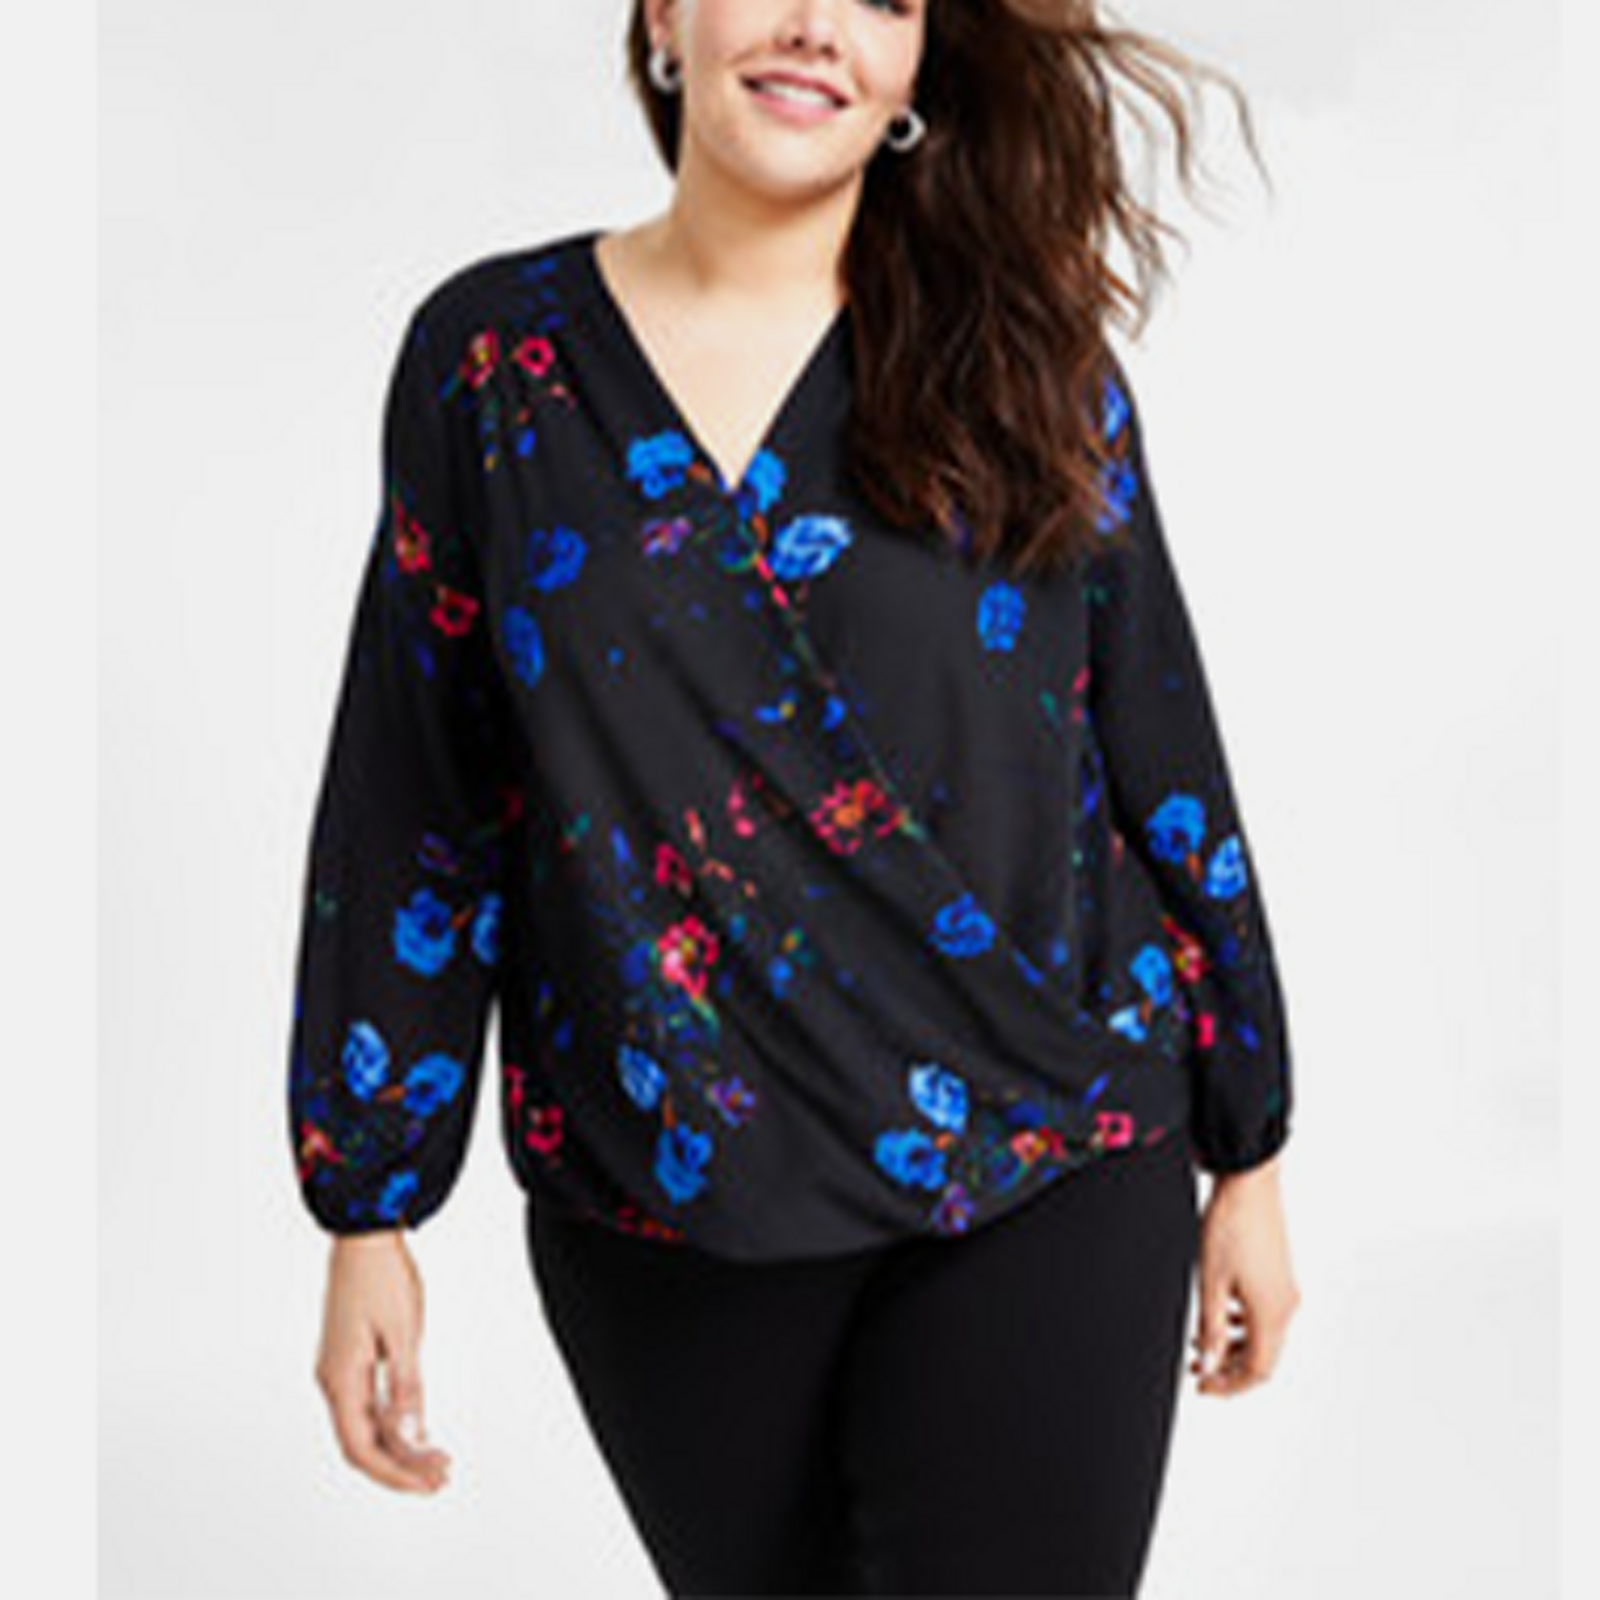 Alfani Plus Size Scarf-Print Halter Top, Only at Macy's  Plus size  outfits, Plus size womens clothing, Plus size swimsuits